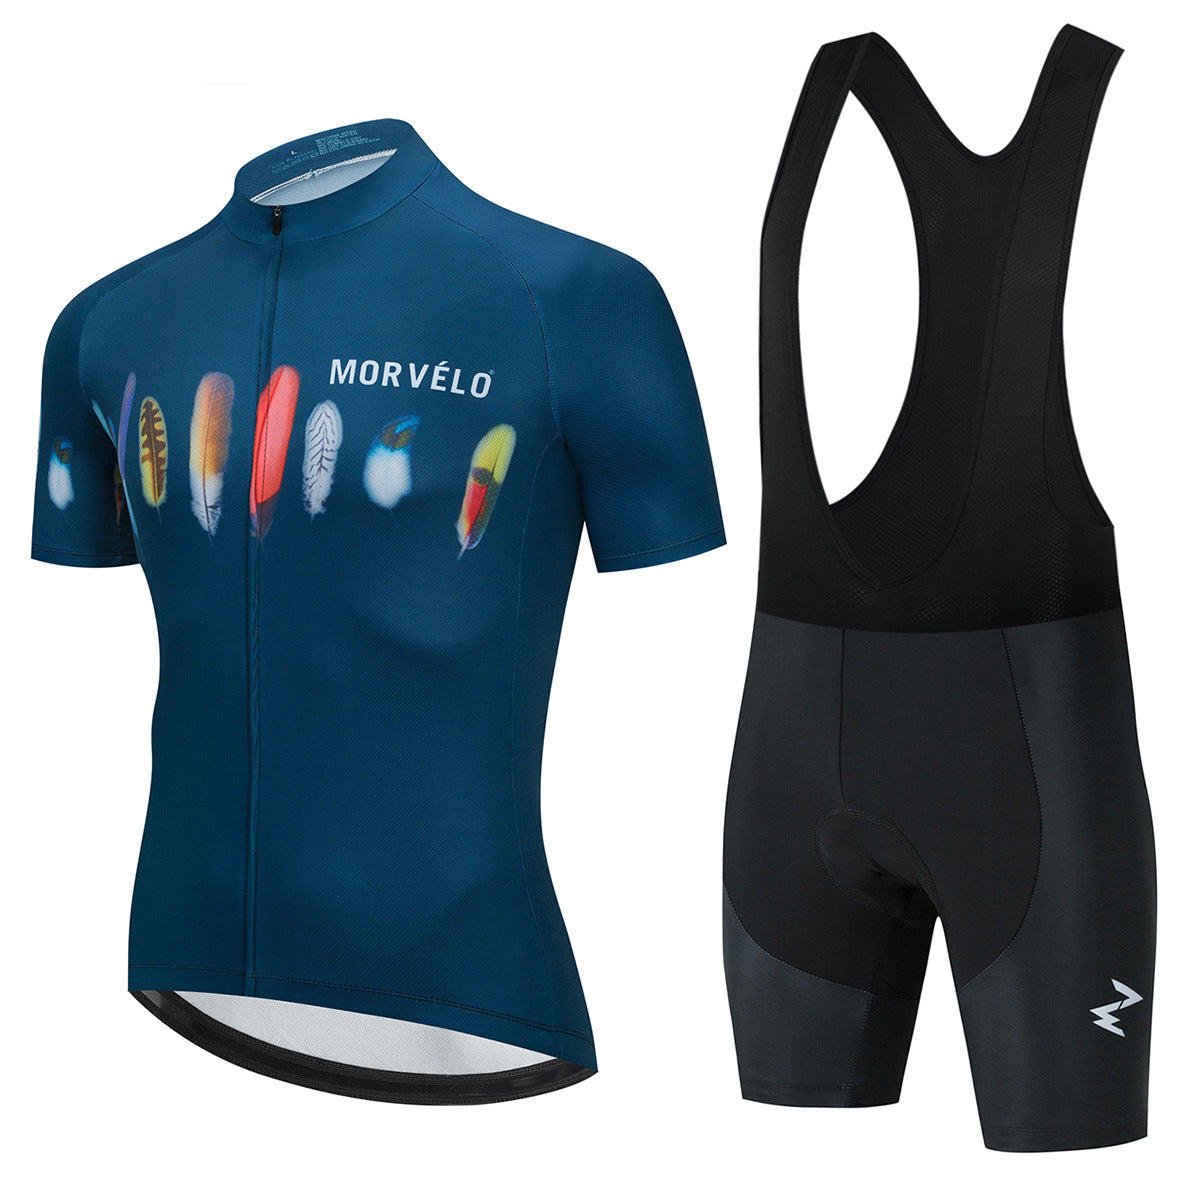 New Summer Short-Sleeved Breathable Cycling Jersey Suit - Navy Bib Shorts Set / XS - Sport Finesse